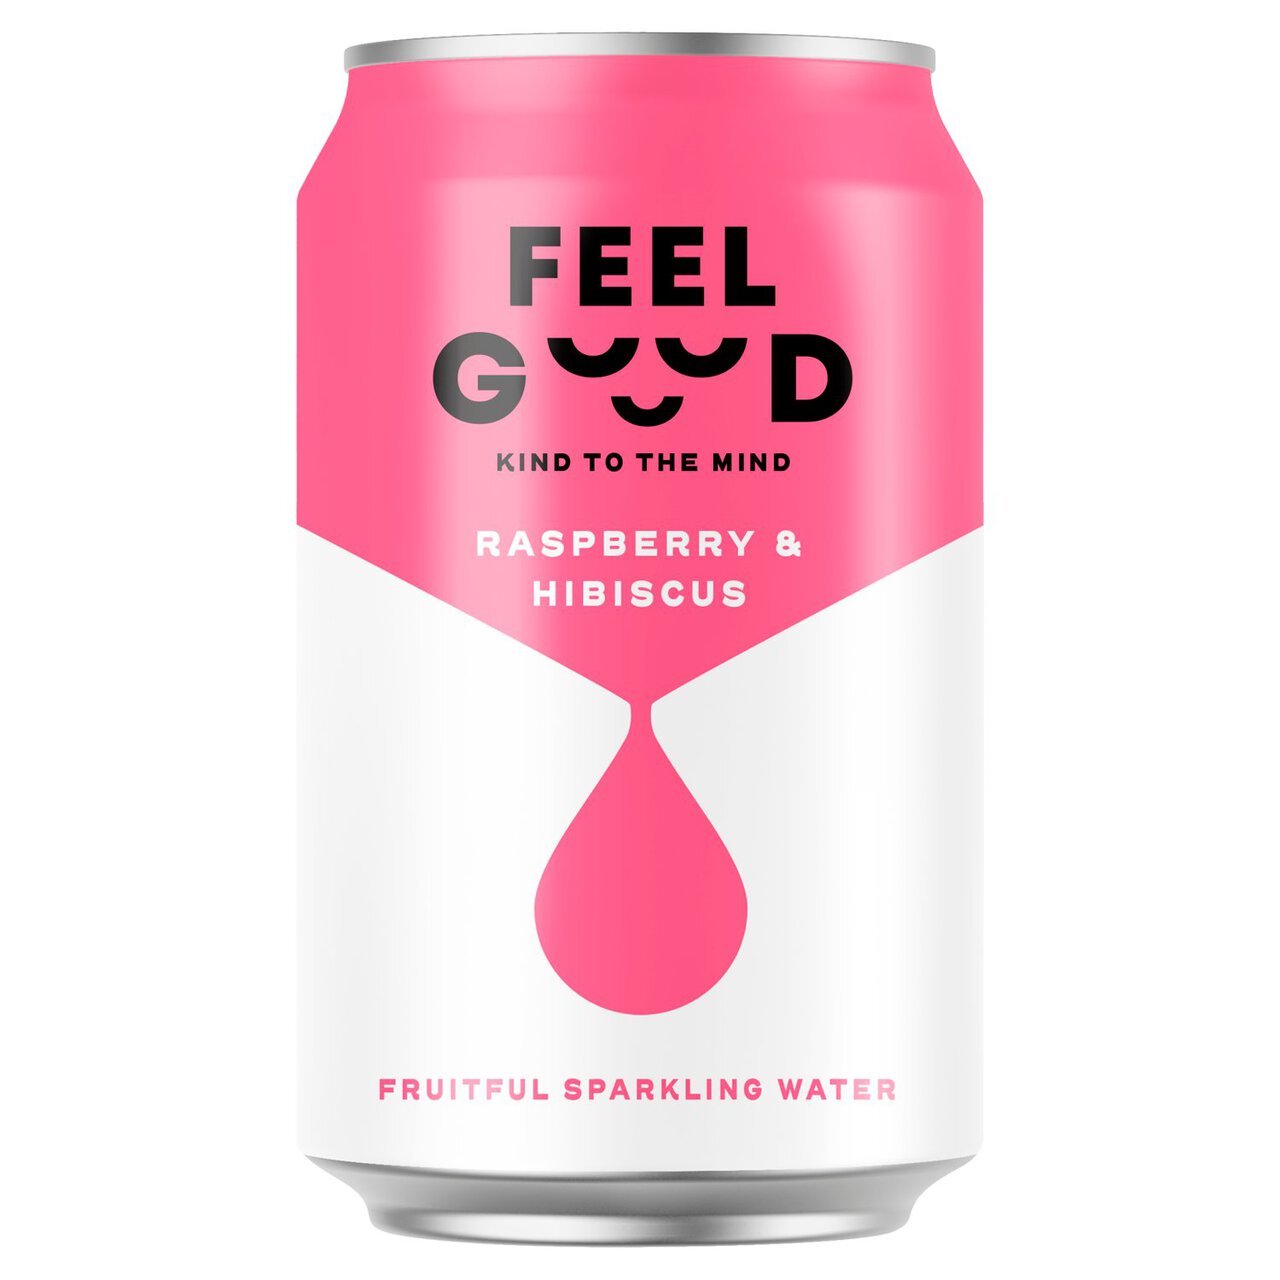 Feel Good Raspberry and Hibiscus Sparkling Fruitful Water 330ml